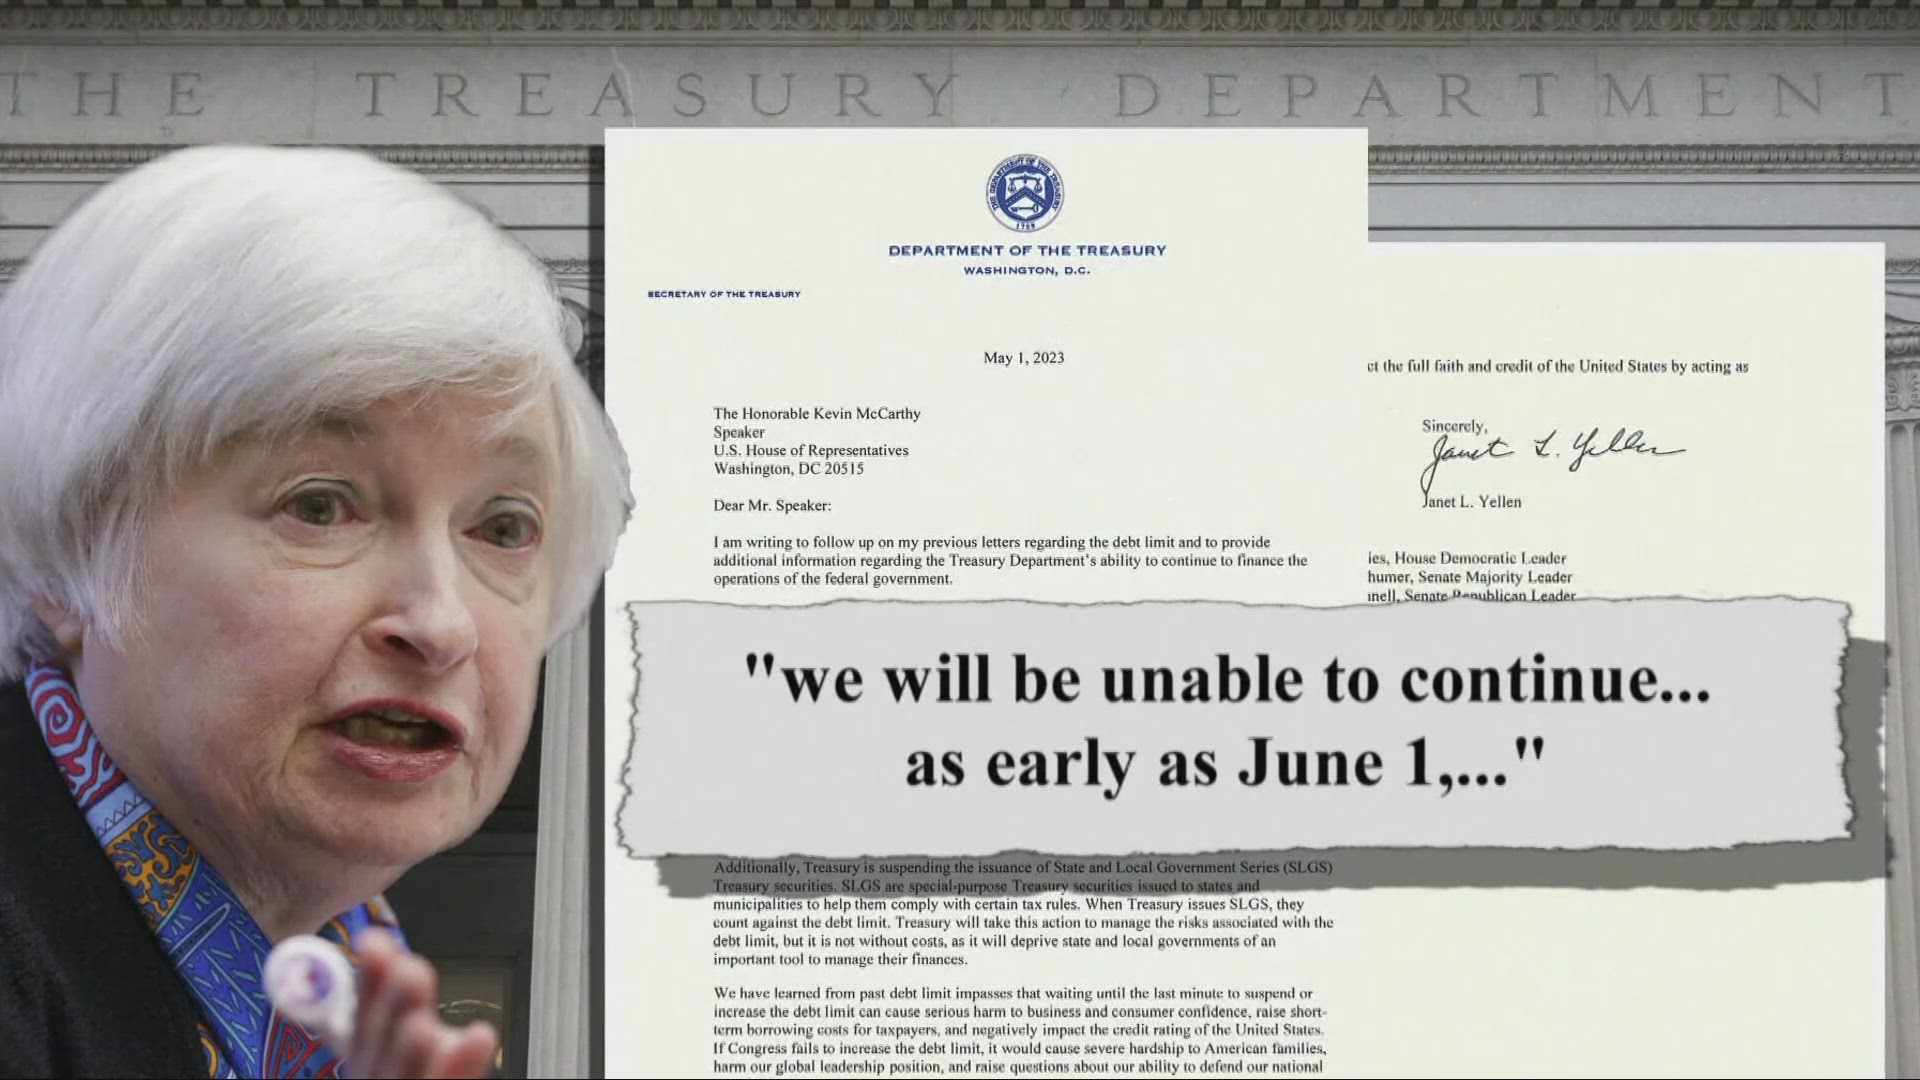 Treasury Secretary Janet Yellen notified Congress on Monday that the U.S. could default on its debt as early as June 1.